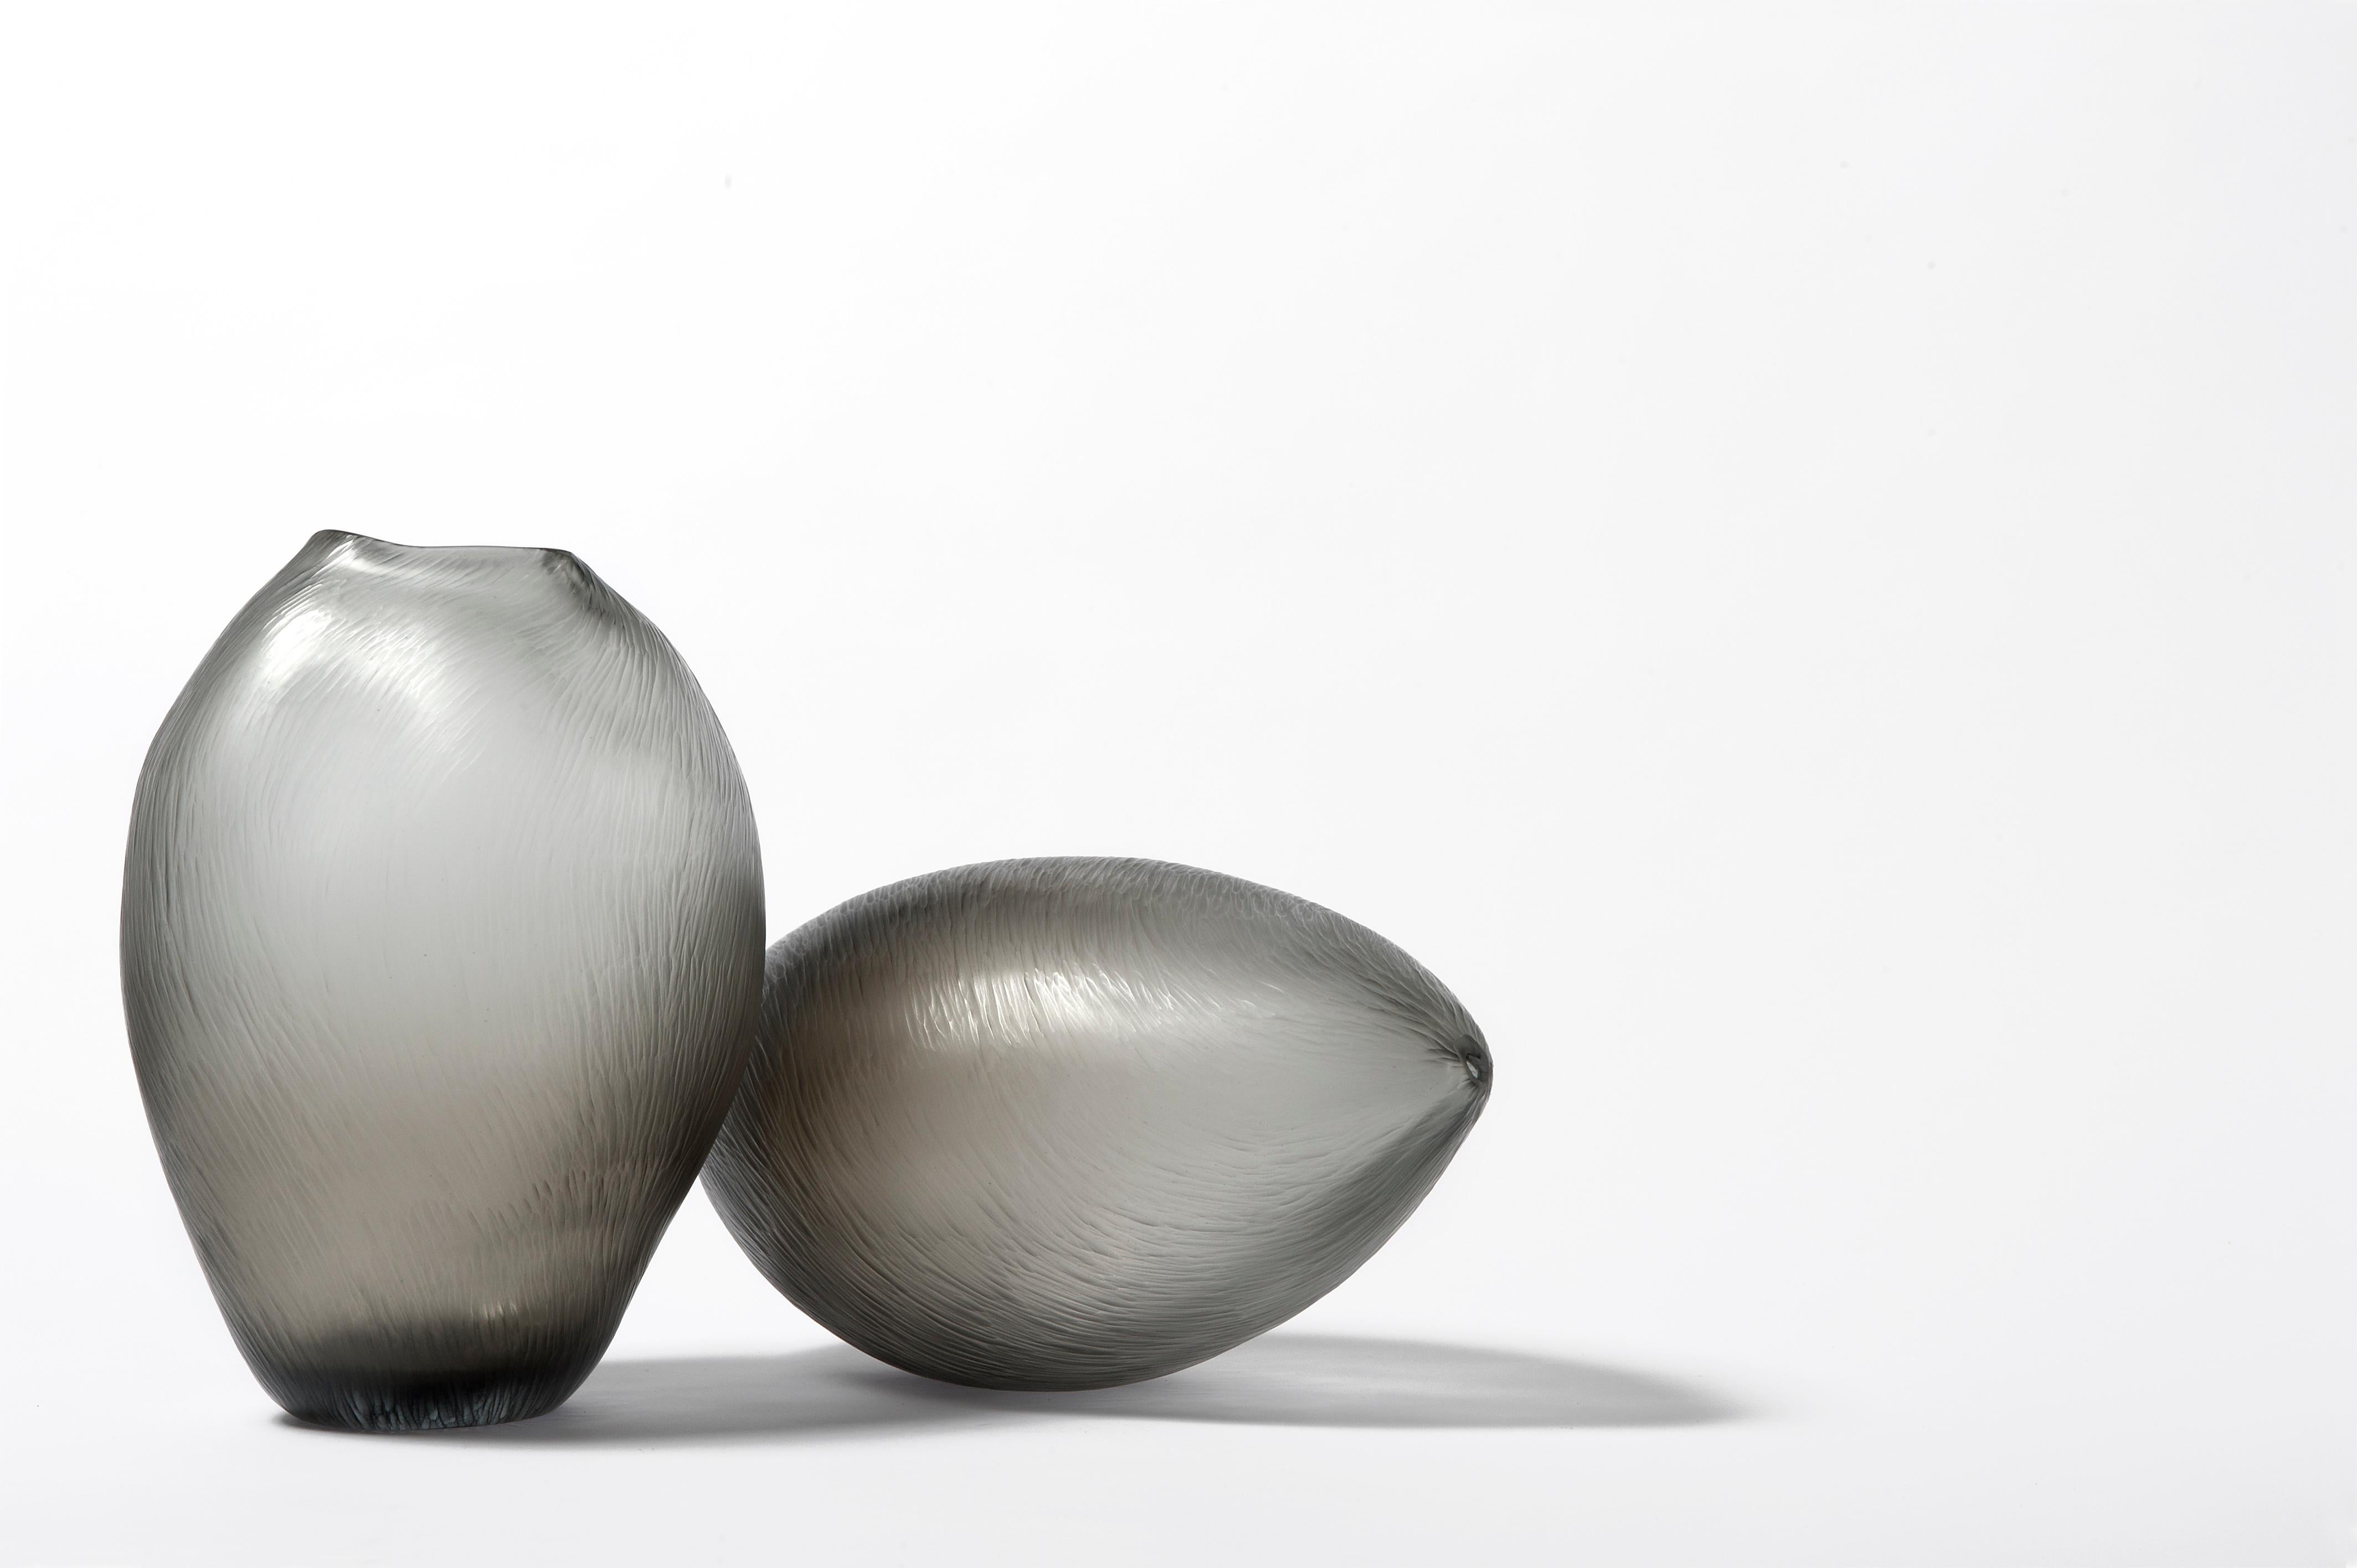 Contemporary glass sculpture with grey-tone shading, executed in Murano, Venice, Italy. Designed by Michela Cattai. 

Michela Cattai's series of Chiaroscuro works were inspired by the painting technique of the same name favoured by the great